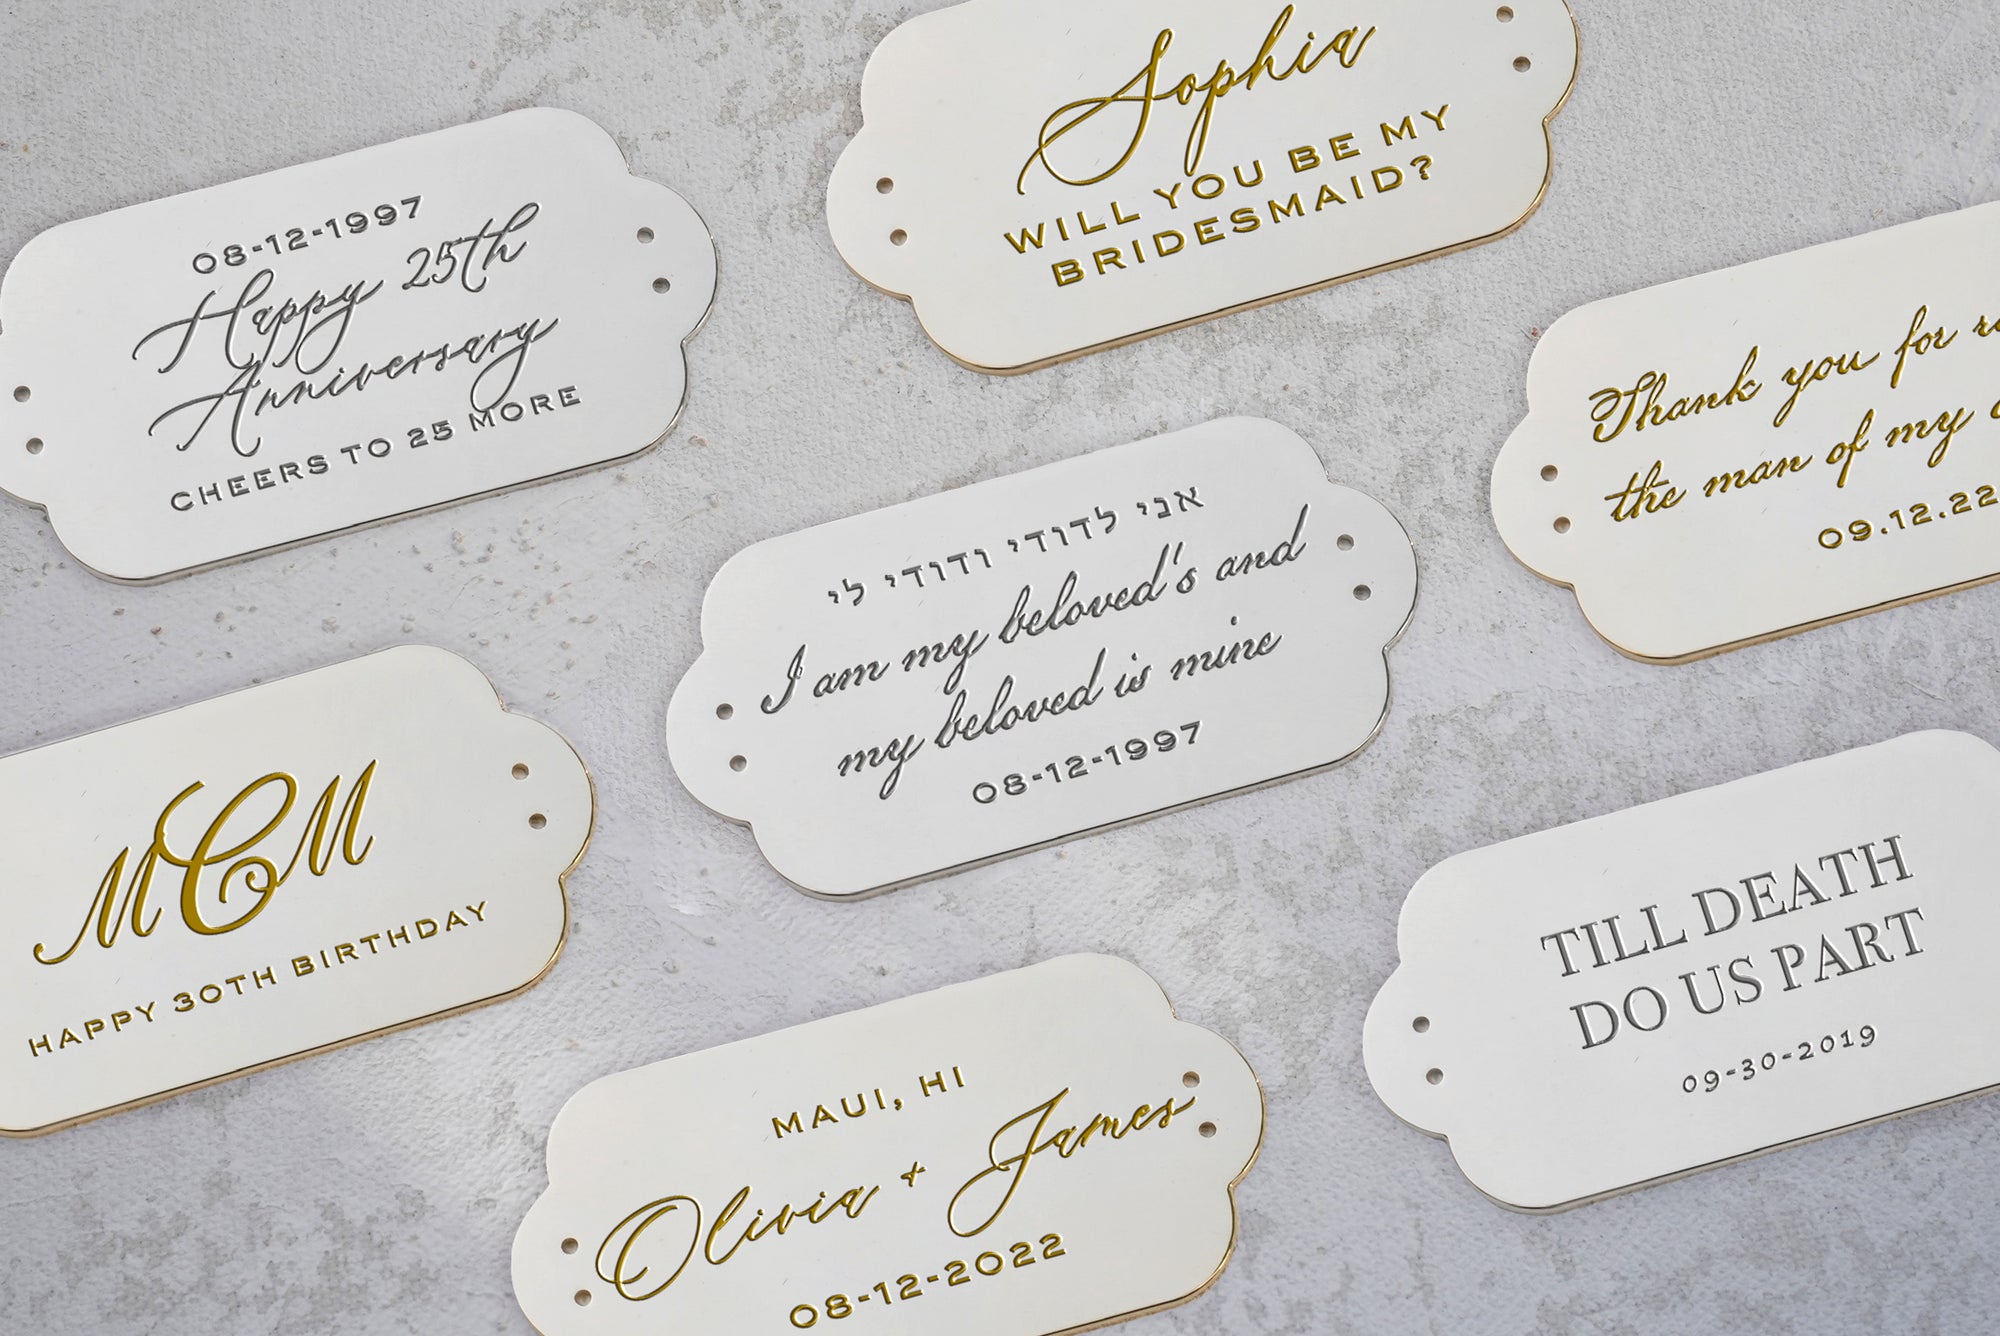 A collection of elegantly handwritten event-themed cards with gold edges on a textured surface.